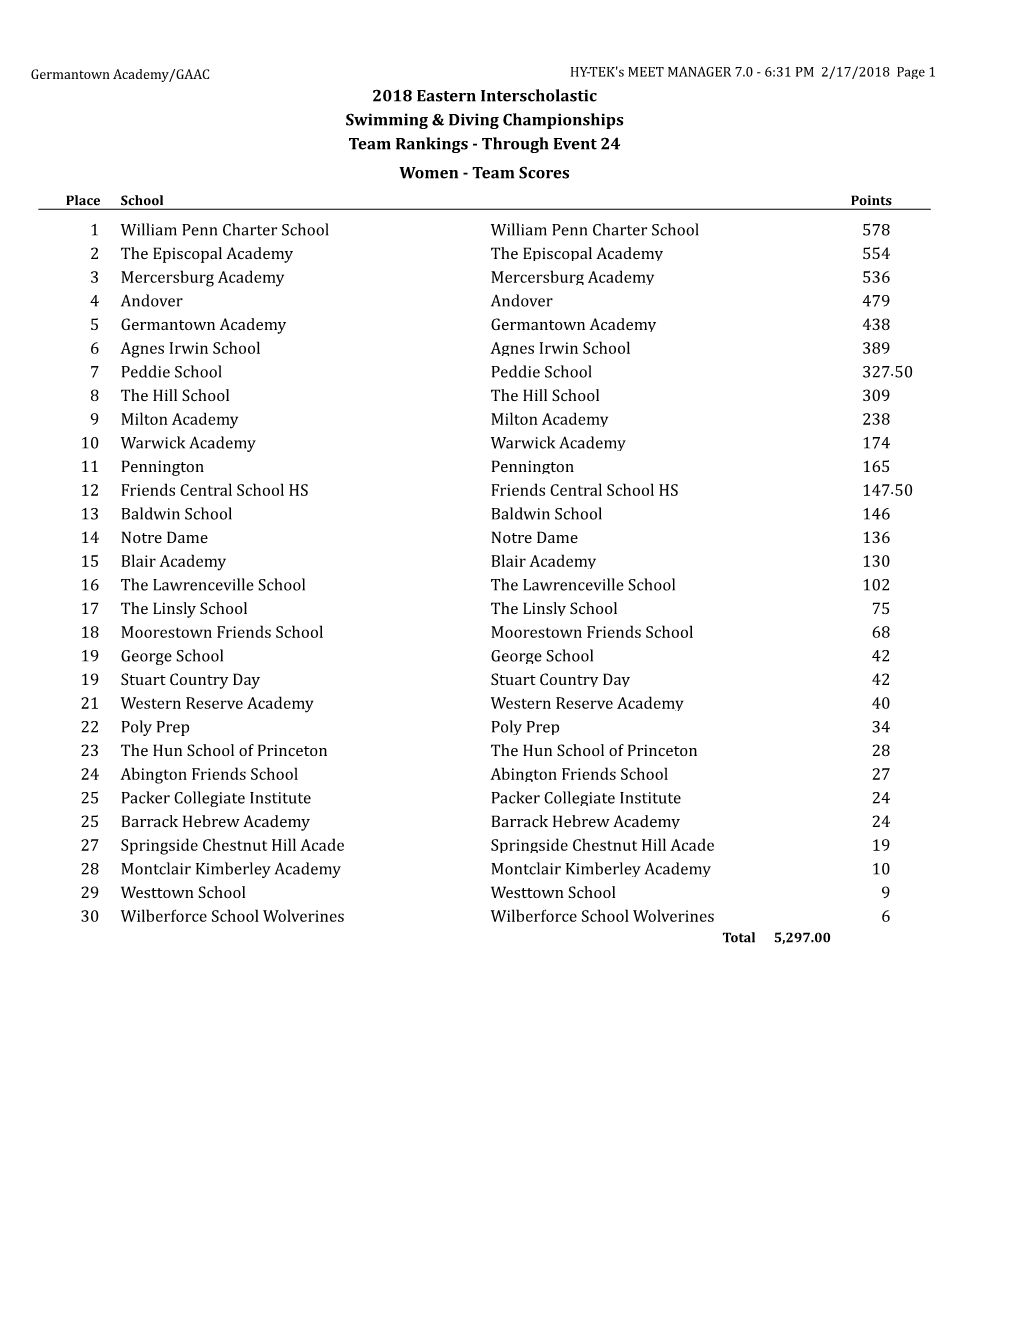 2018 Eastern Interscholastic Swimming & Diving